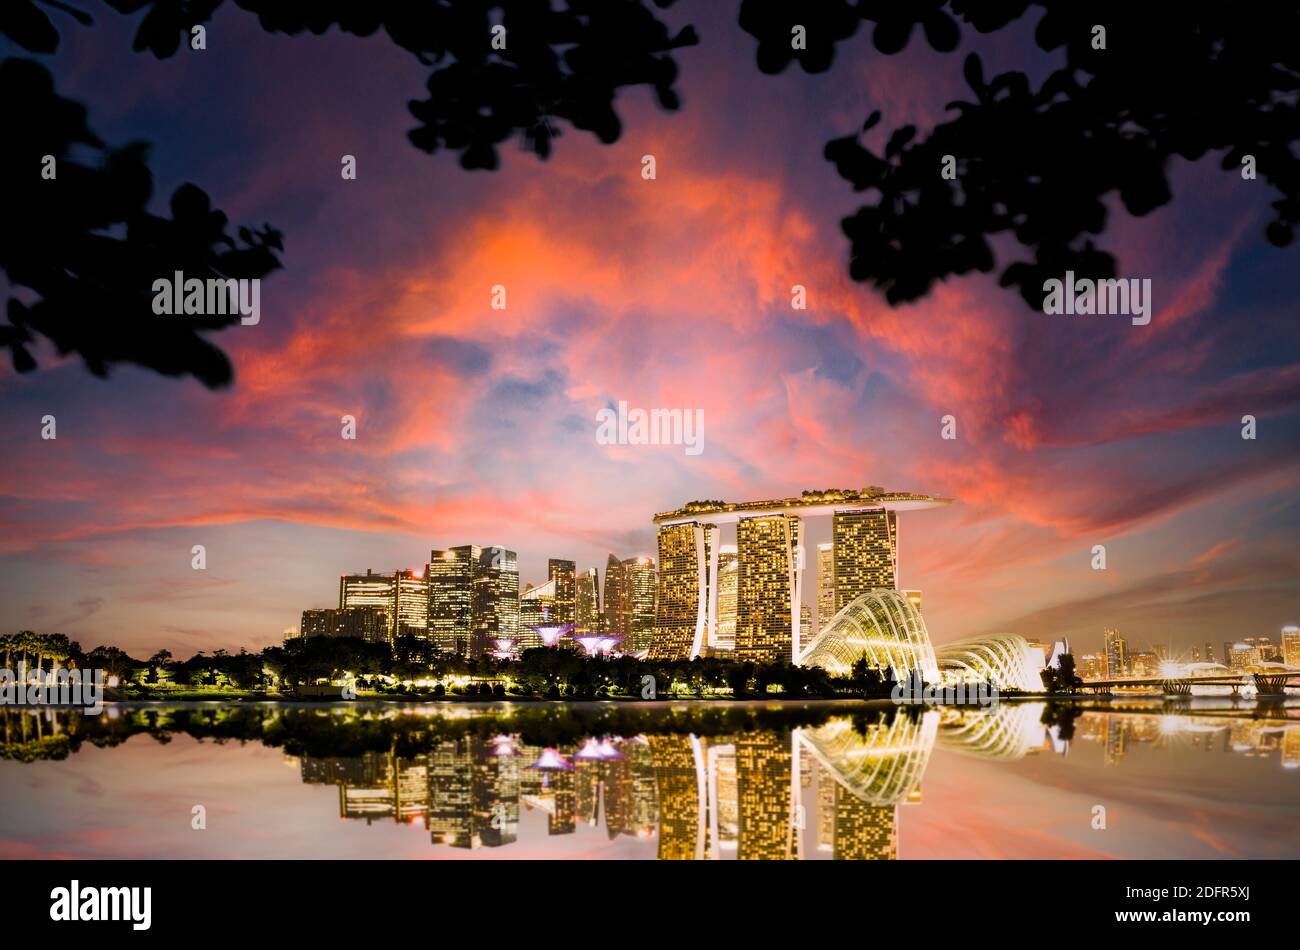 Stunning view of the Singapore's skyline during a beautiful and dramatic sunset.  Singapore is a sovereign island city-state in Southeast Asia. Stock Photo